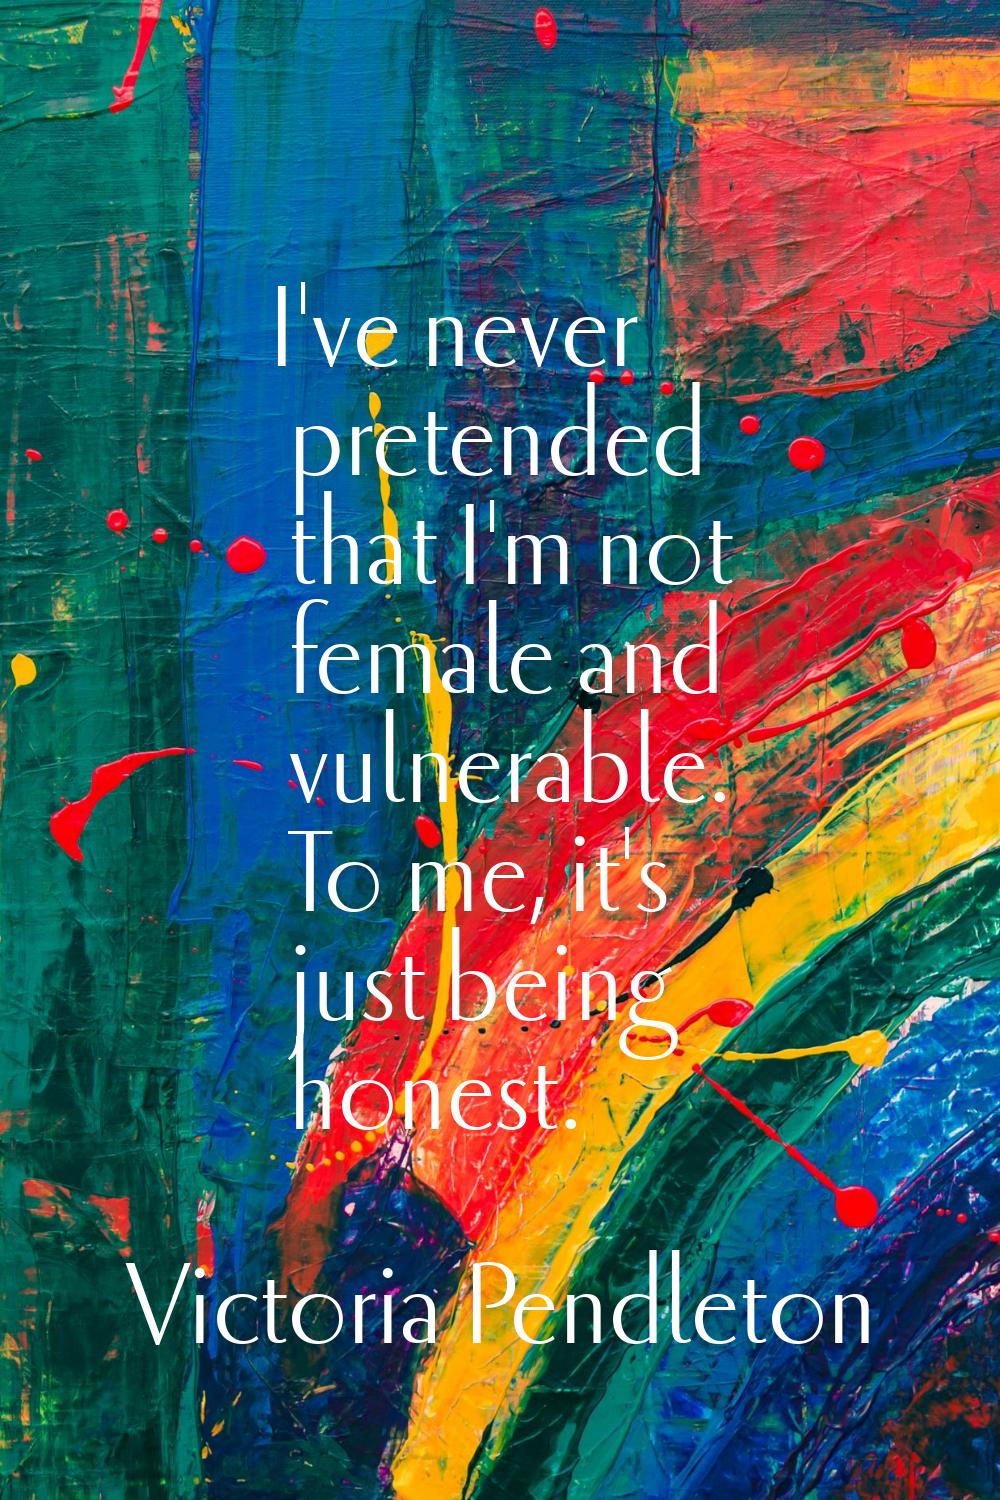 I've never pretended that I'm not female and vulnerable. To me, it's just being honest.